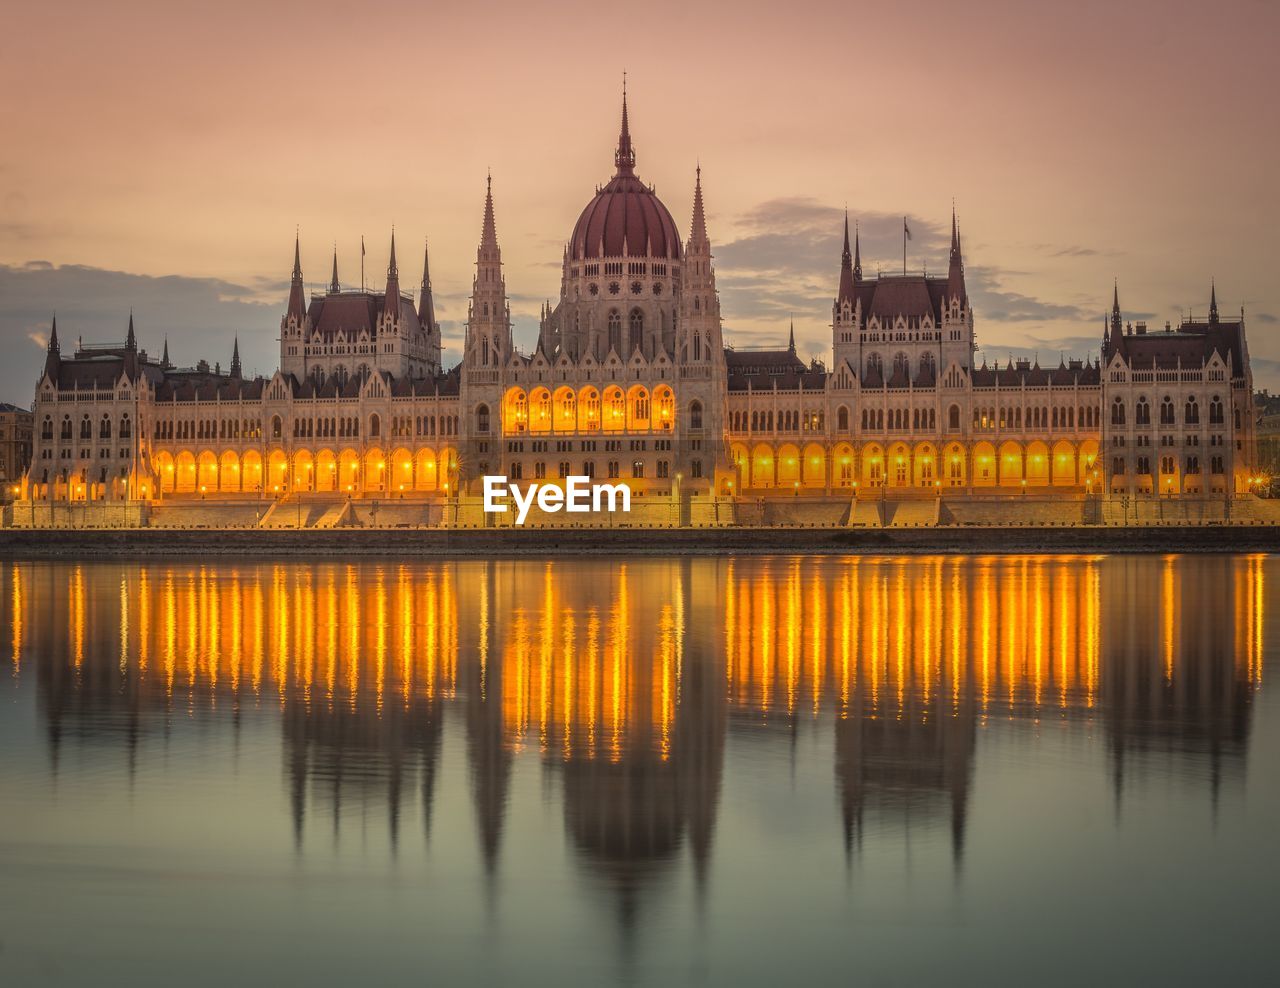 Illuminated hungarian parliament building by river at dusk